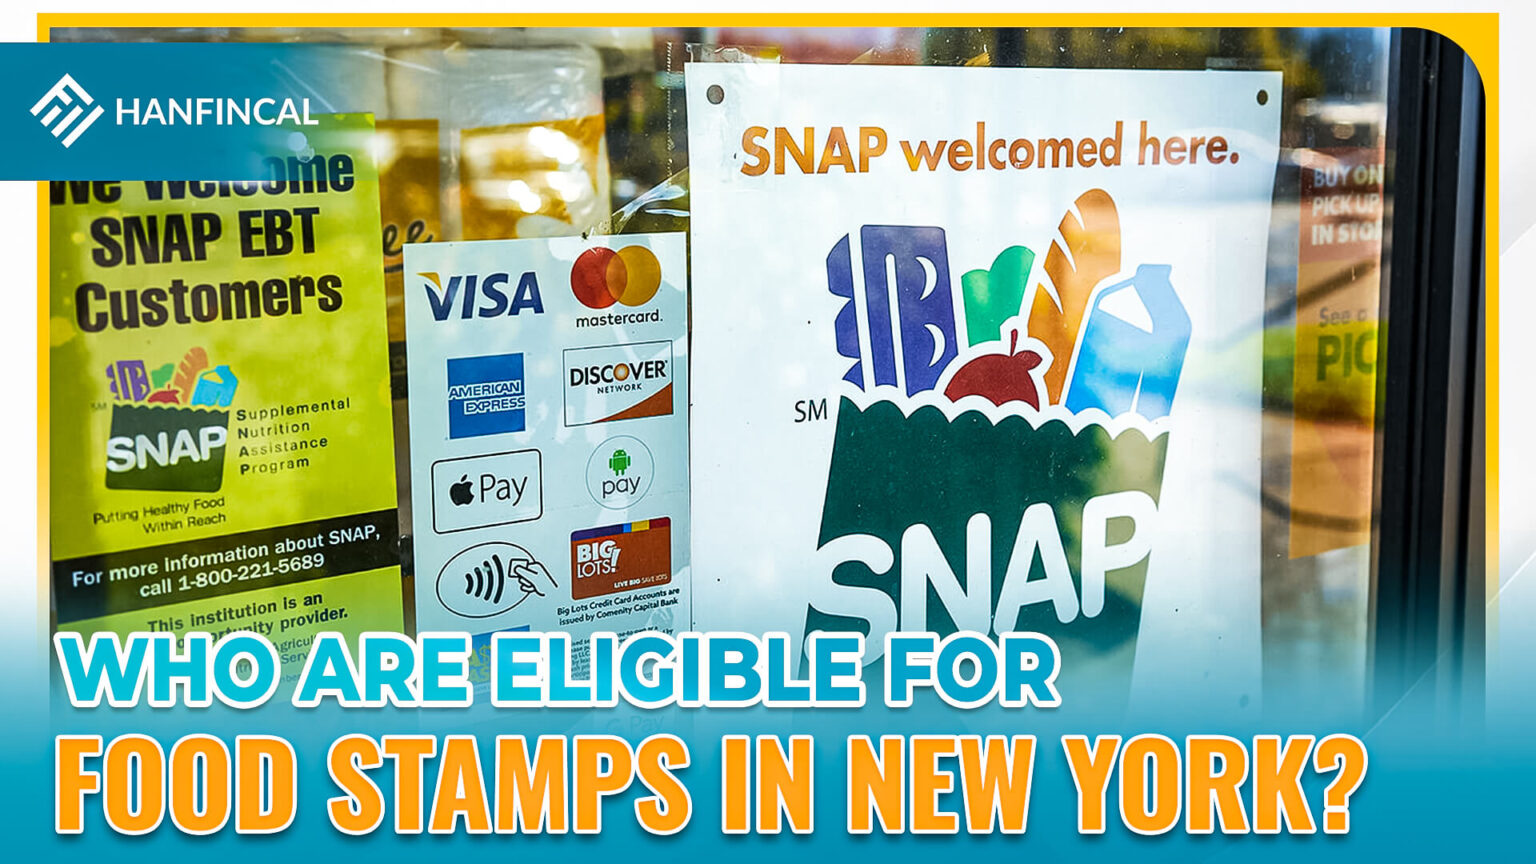 How to apply for Food Stamps in New York (02/2023)? Hanfincal